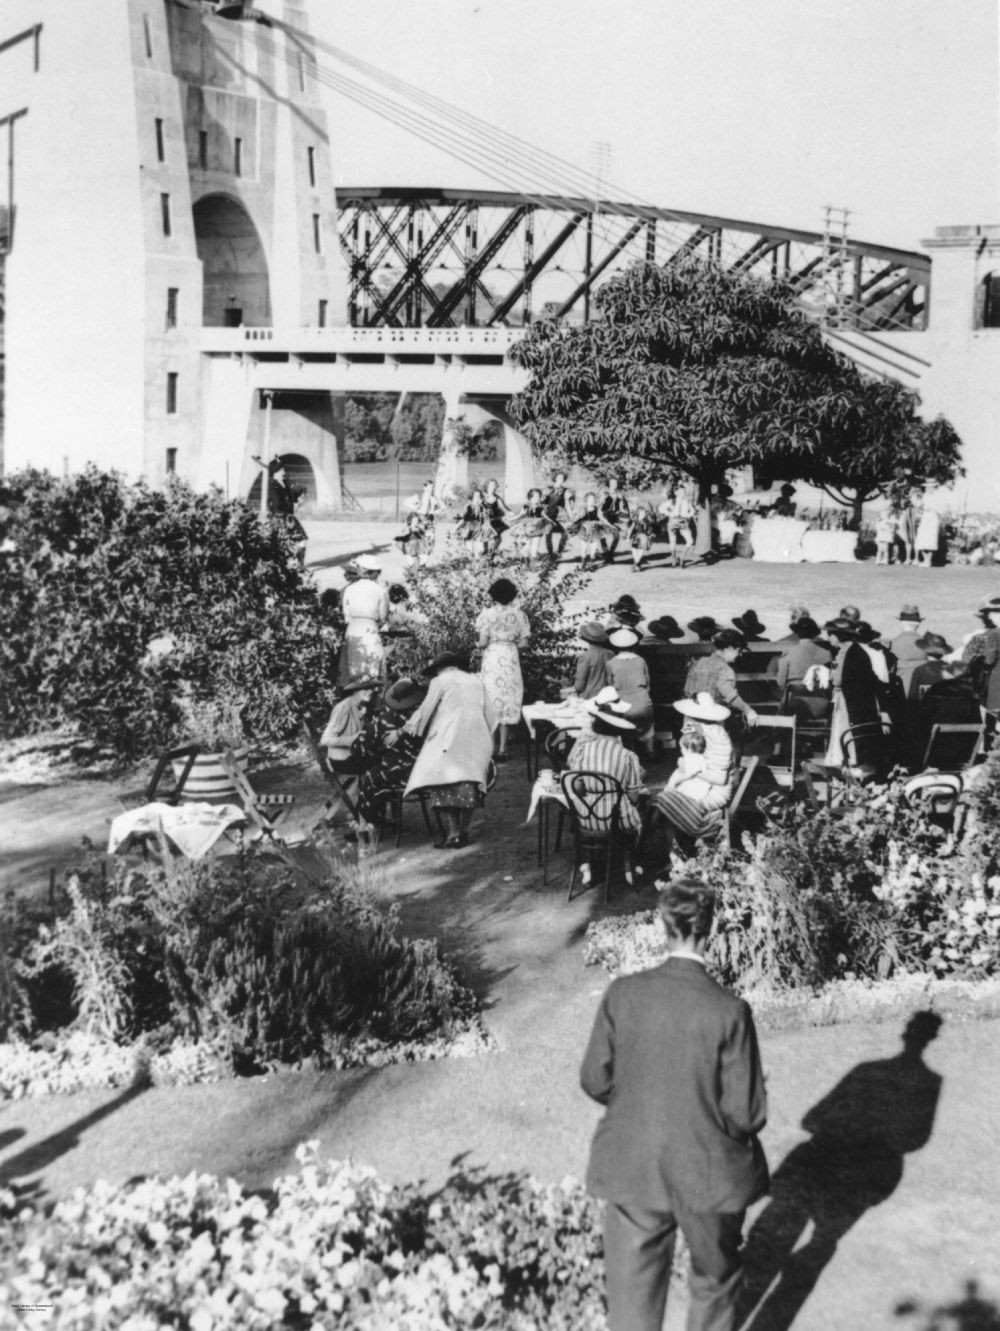 Official opening of the Indooroopilly Toll Bridge 1932 Image No 181335